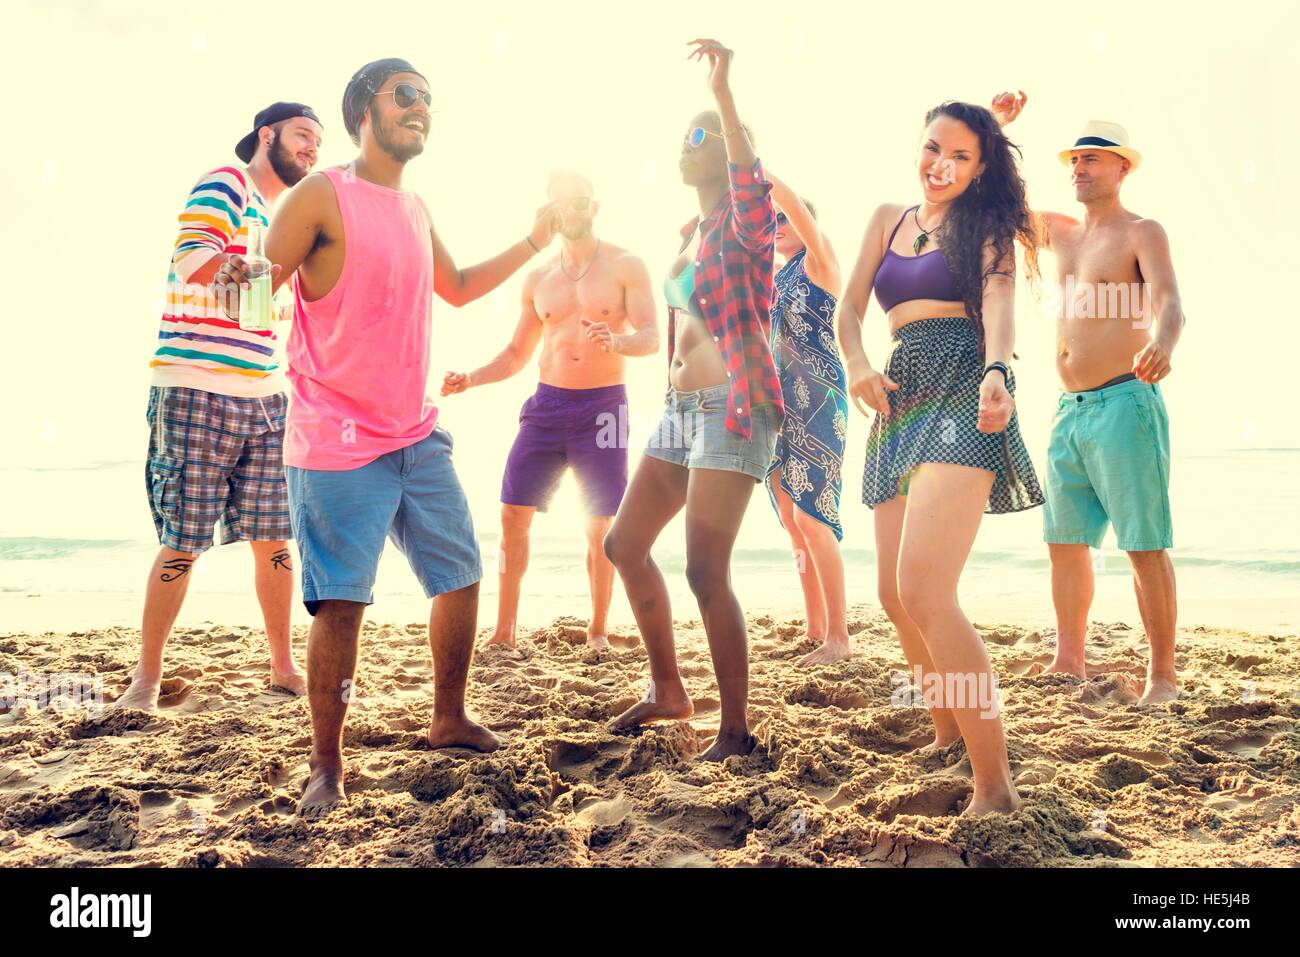 Diverse Young People Fun Beach Concept Stock Photo - Alamy